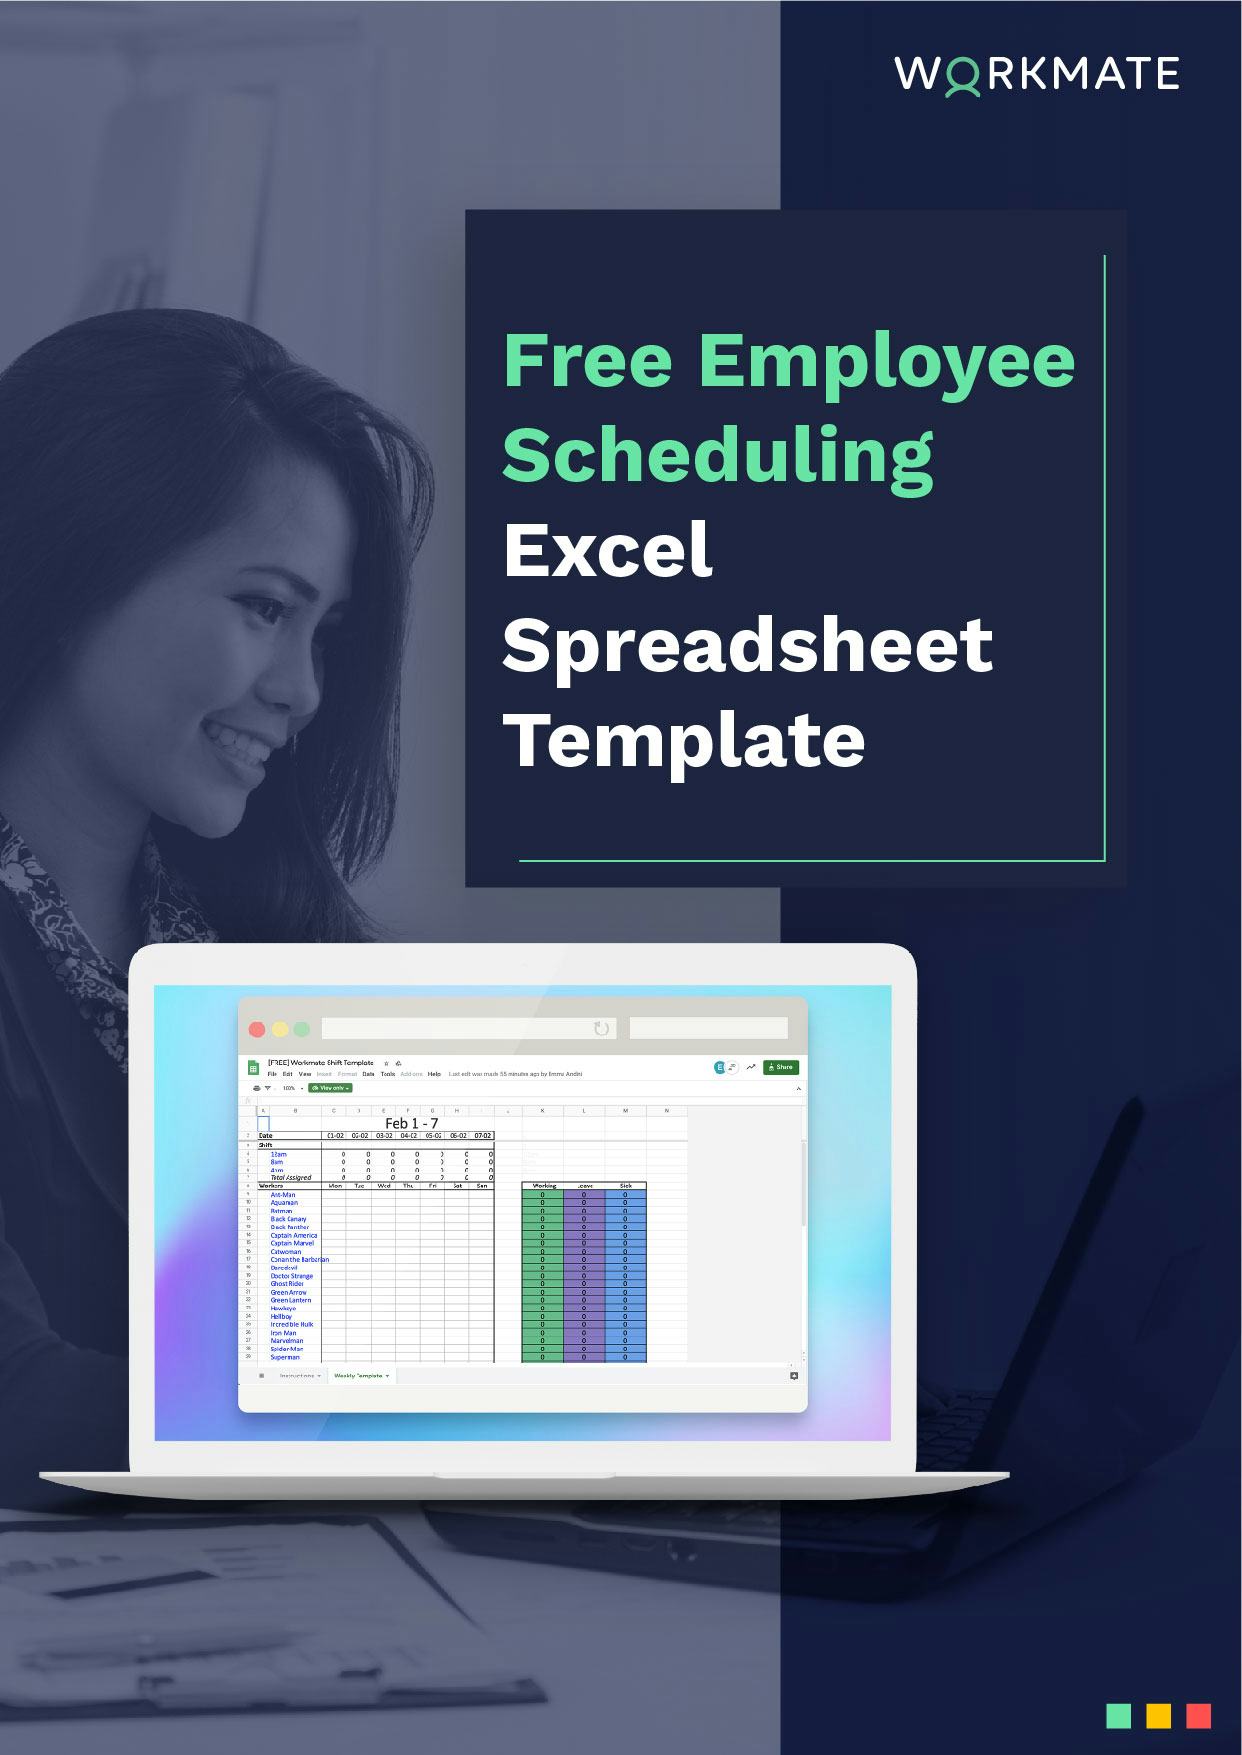 Free Employee Scheduling Excel Spreadsheet Template